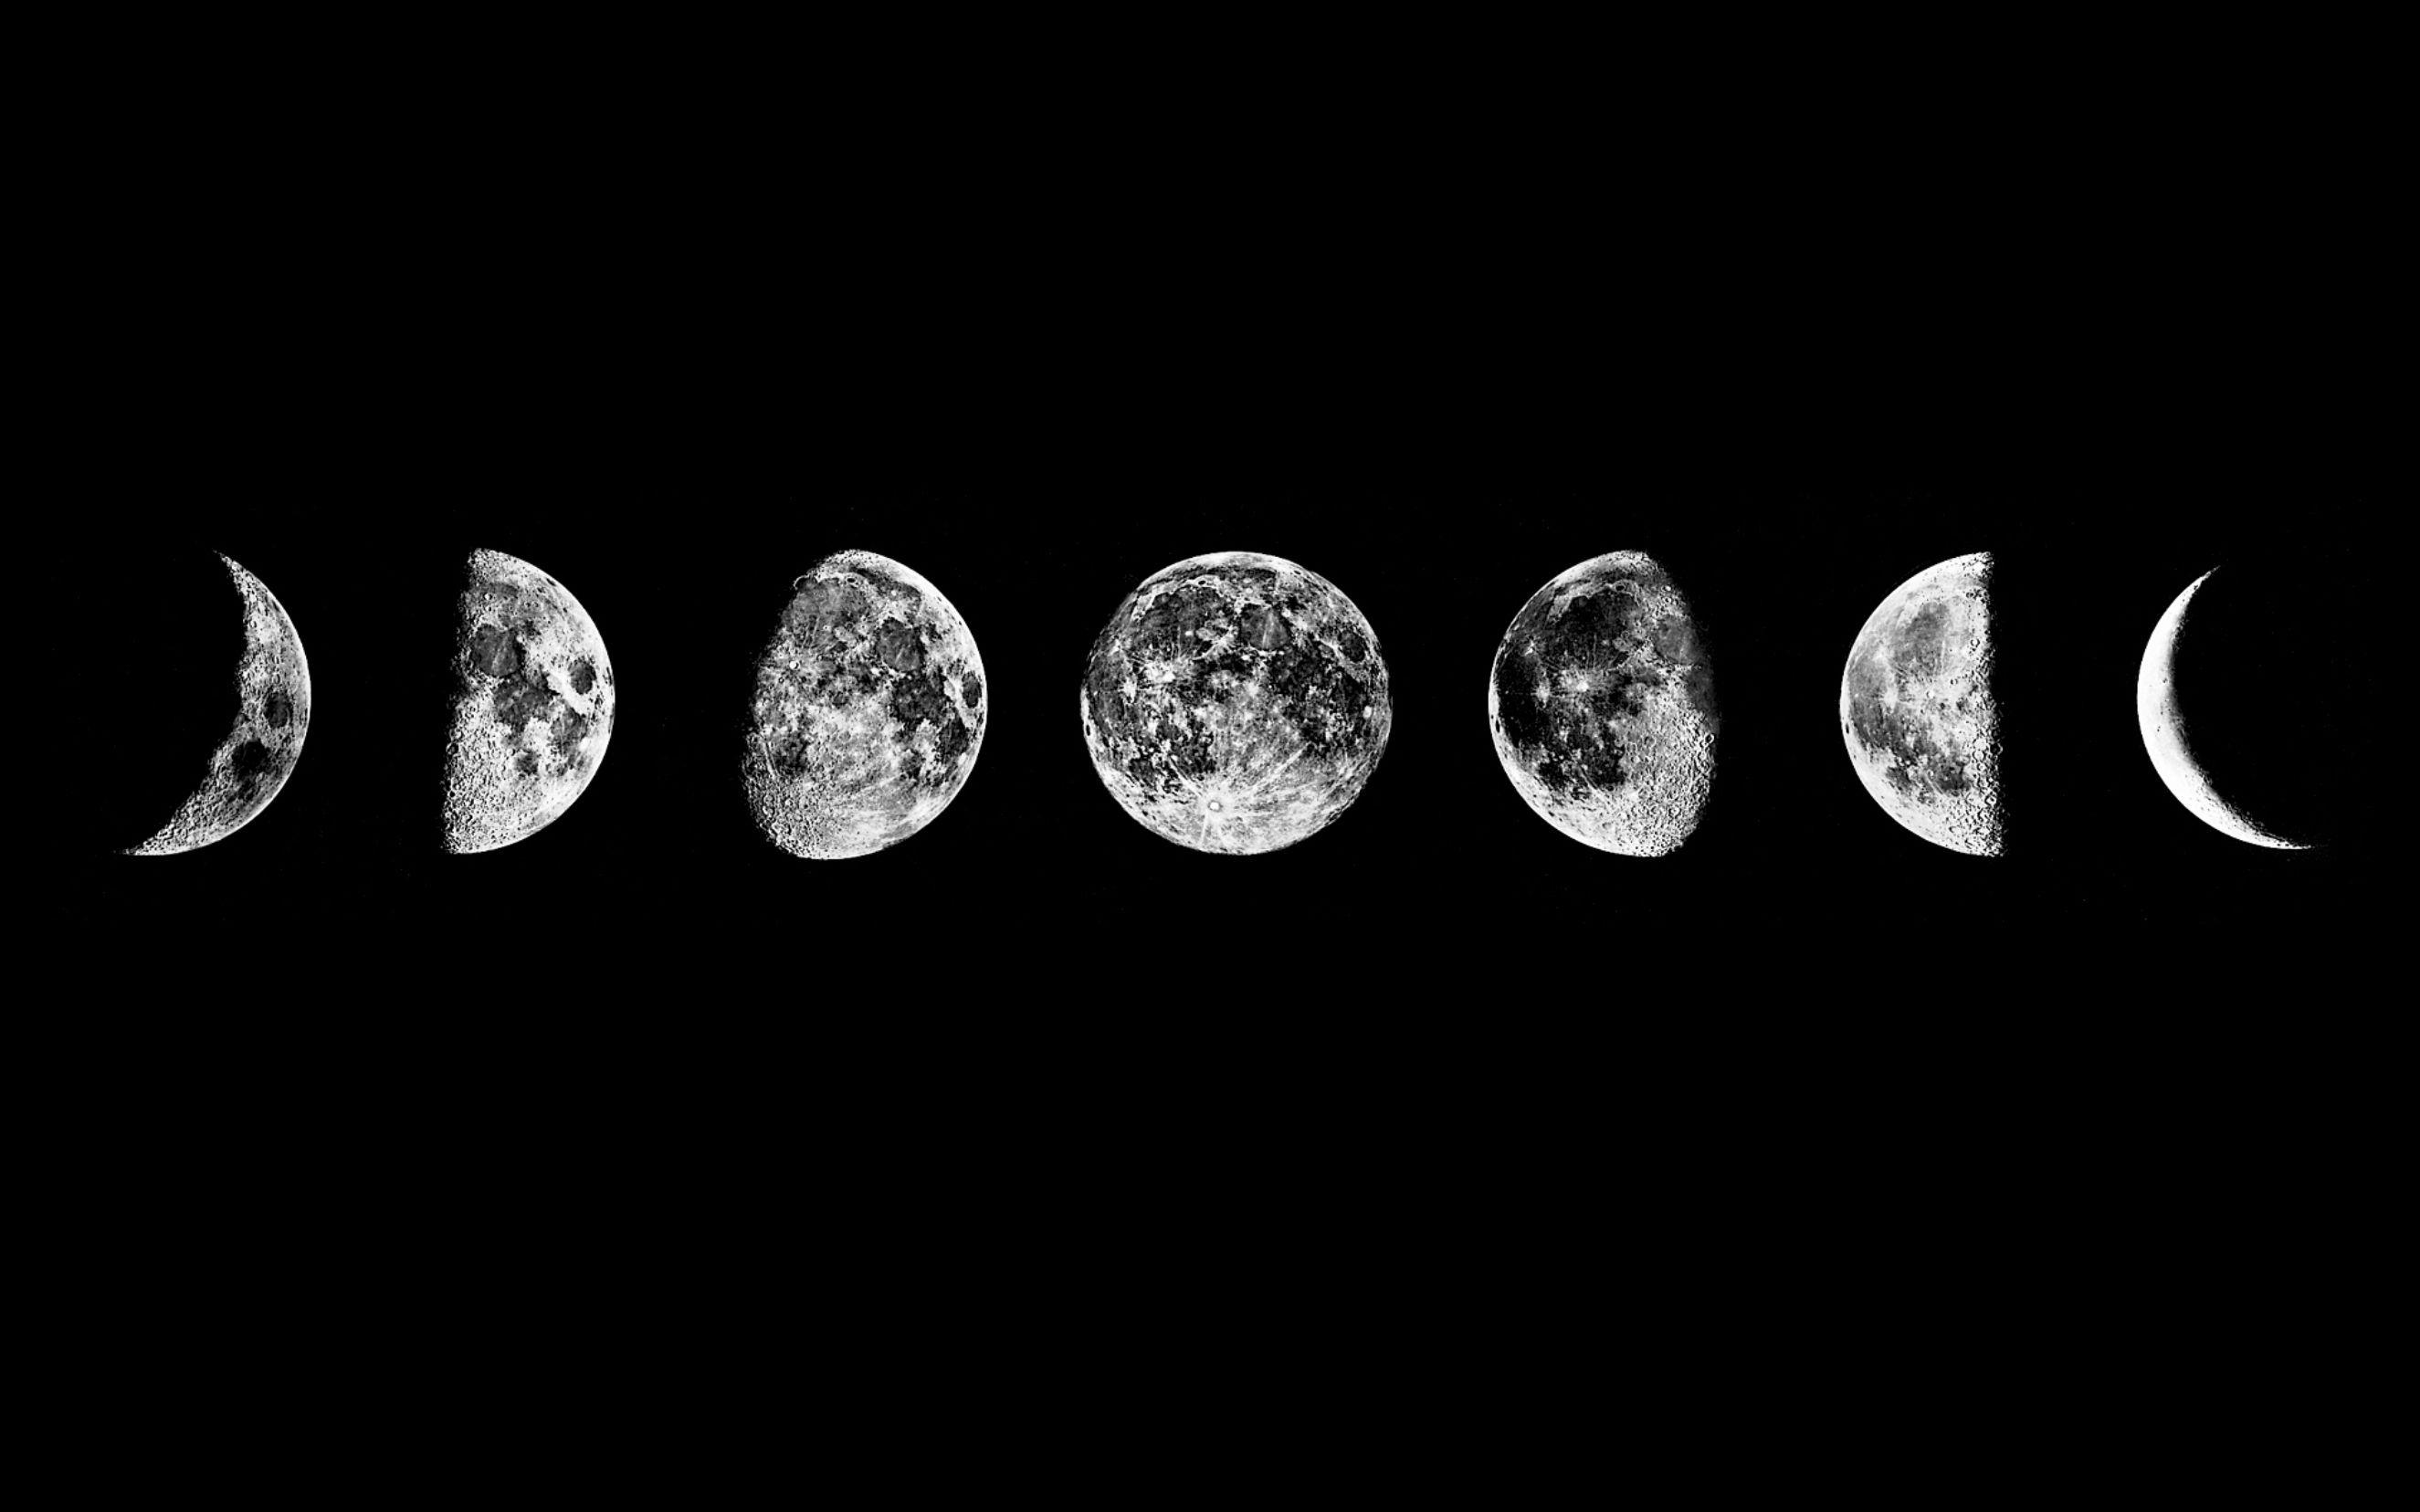 Lunar moon phases picture hipster, Hipster